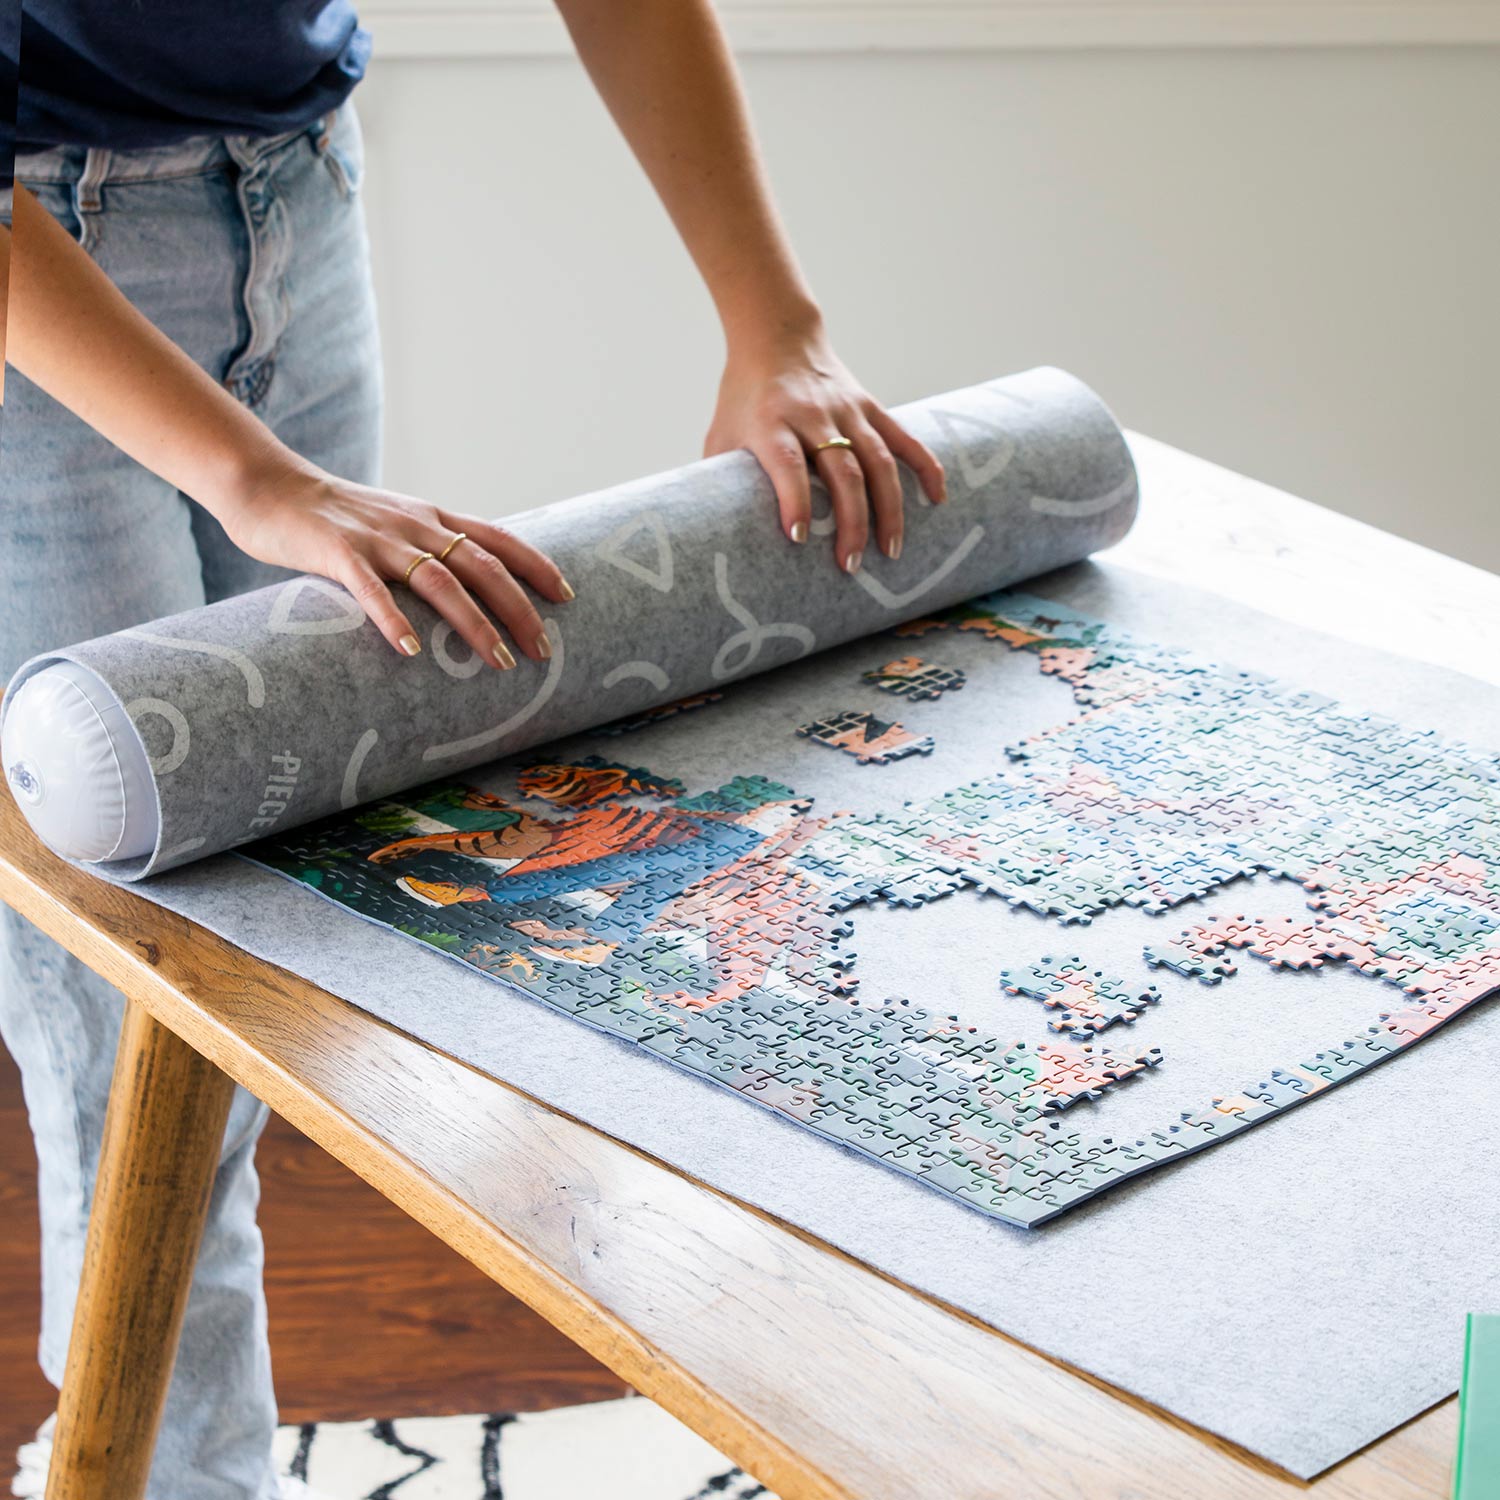 PieceHouse Puzzle Mats: Elevate your puzzle game with the best